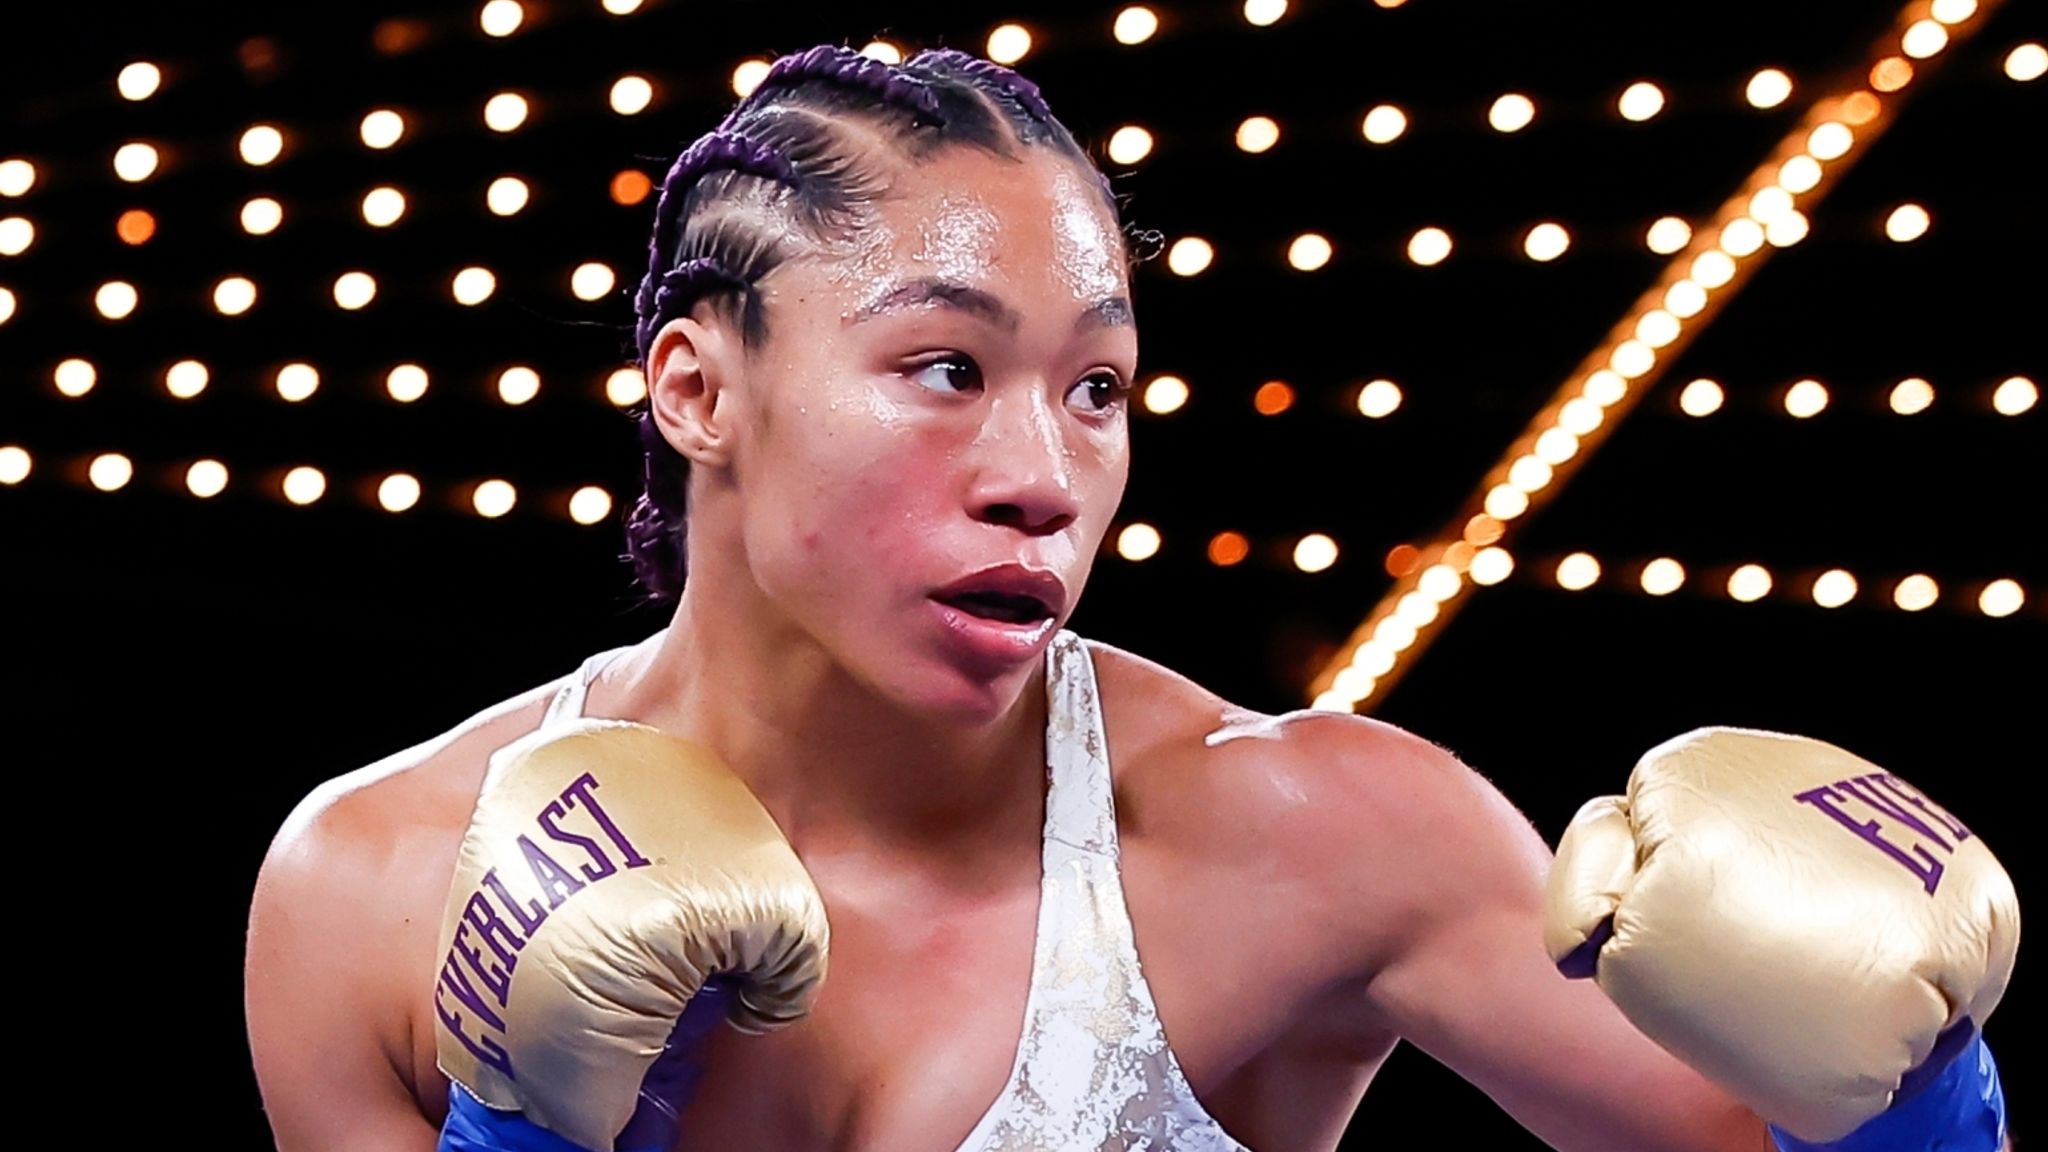 Alycia Baumgardner returns adverse analytical finding and now faces full investigation after world title win Boxing News Sky Sports